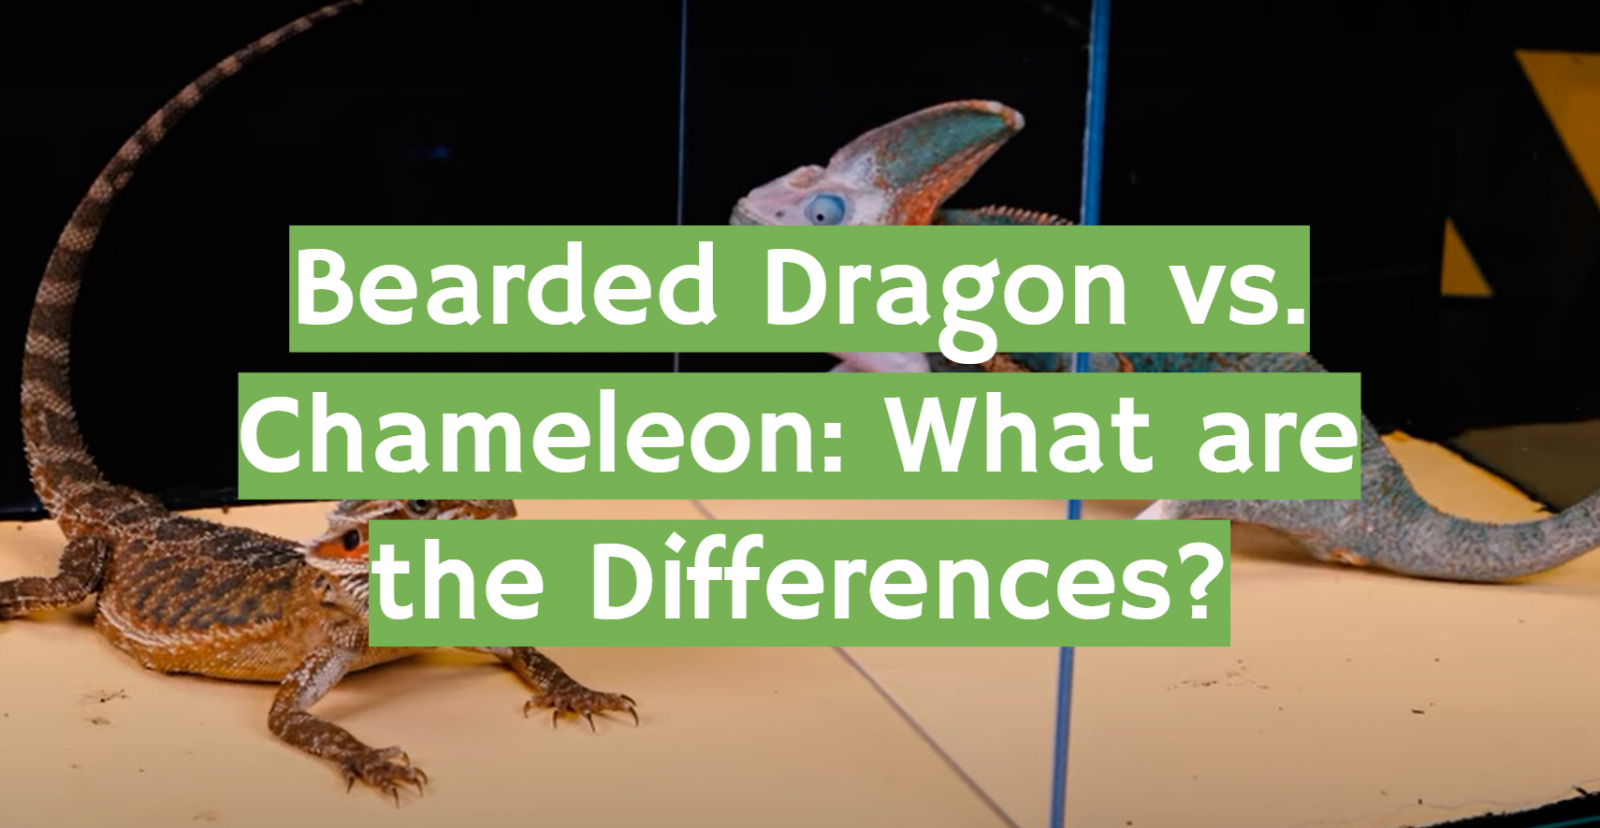 Bearded Dragon vs. Chameleon: What are the Differences?